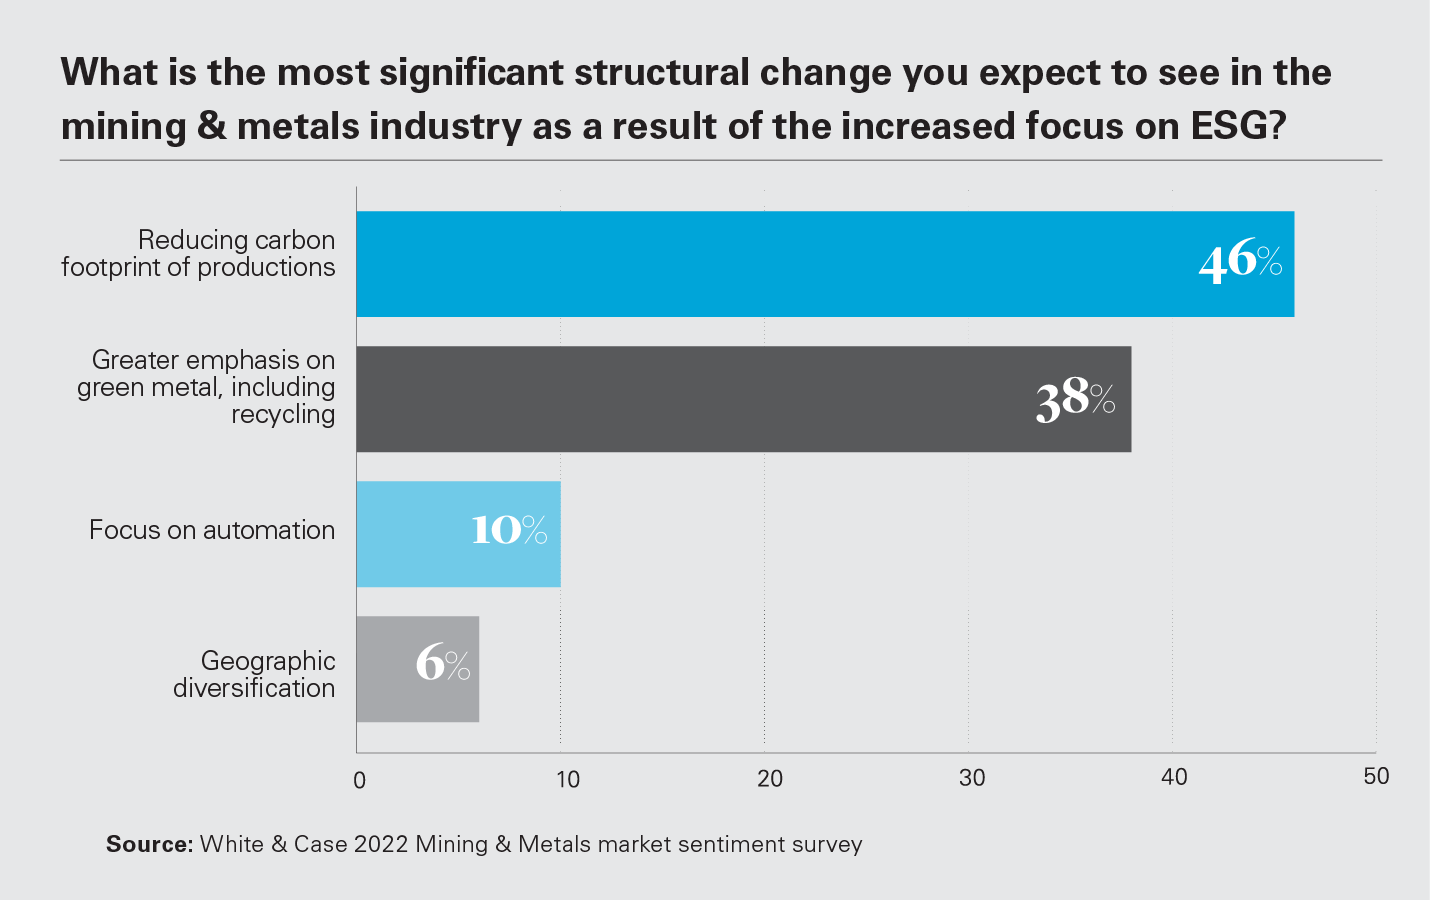 What is the most significant structural change you expect to see in the mining & metals industry as a result of the increased focus on ESG?